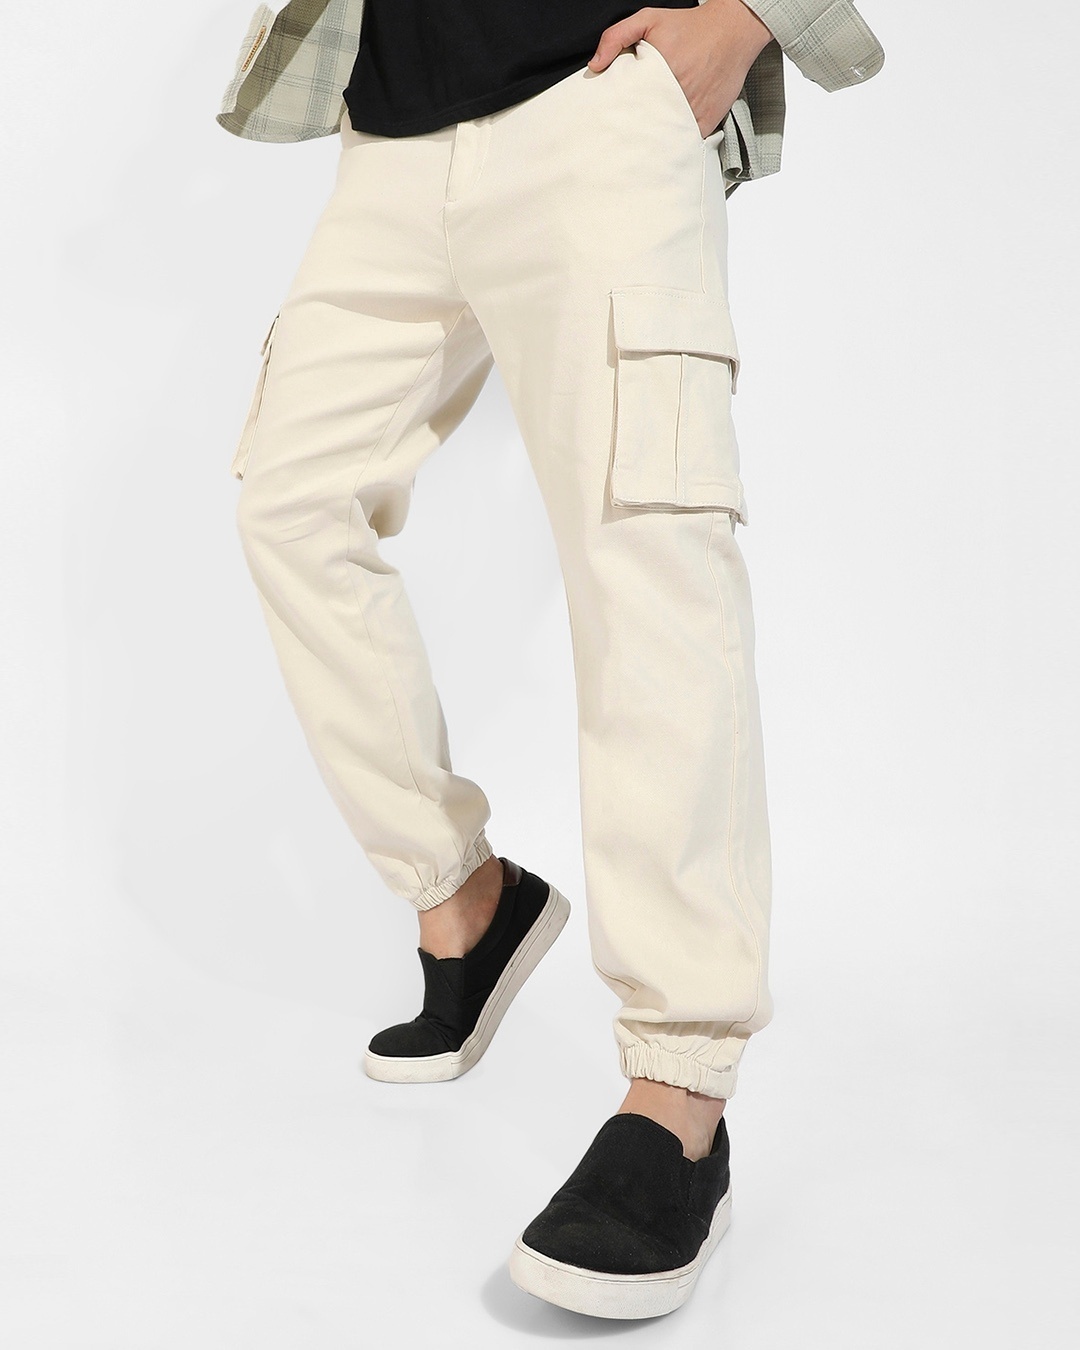 Buy tbase Mens Beige Solid Cargo Pants  Cargo Pant for Men at Amazonin